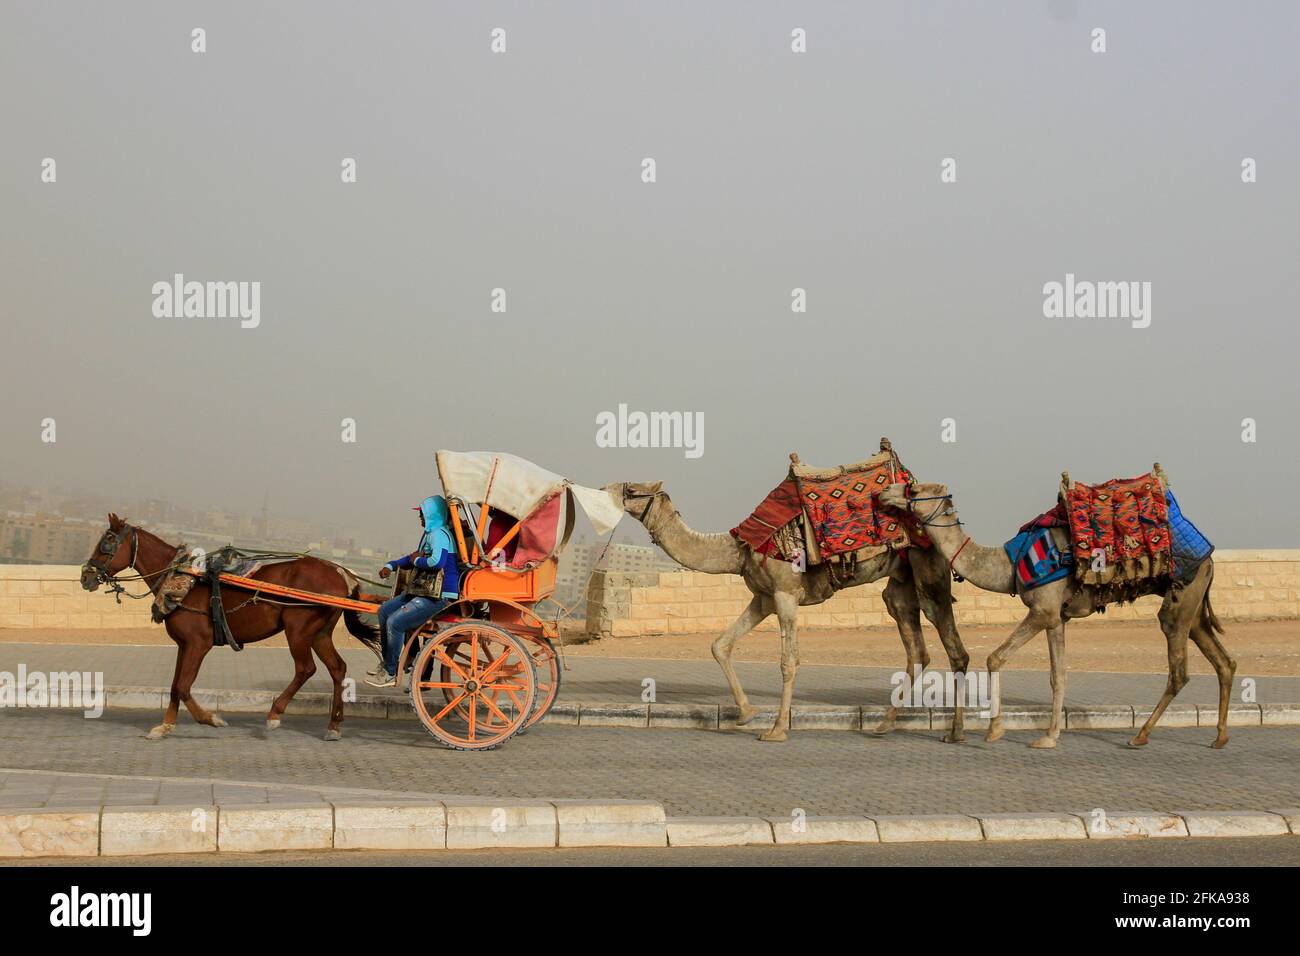 Traditional horse drawn cart with two camels following on busy road near Giza, Egypt Stock Photo